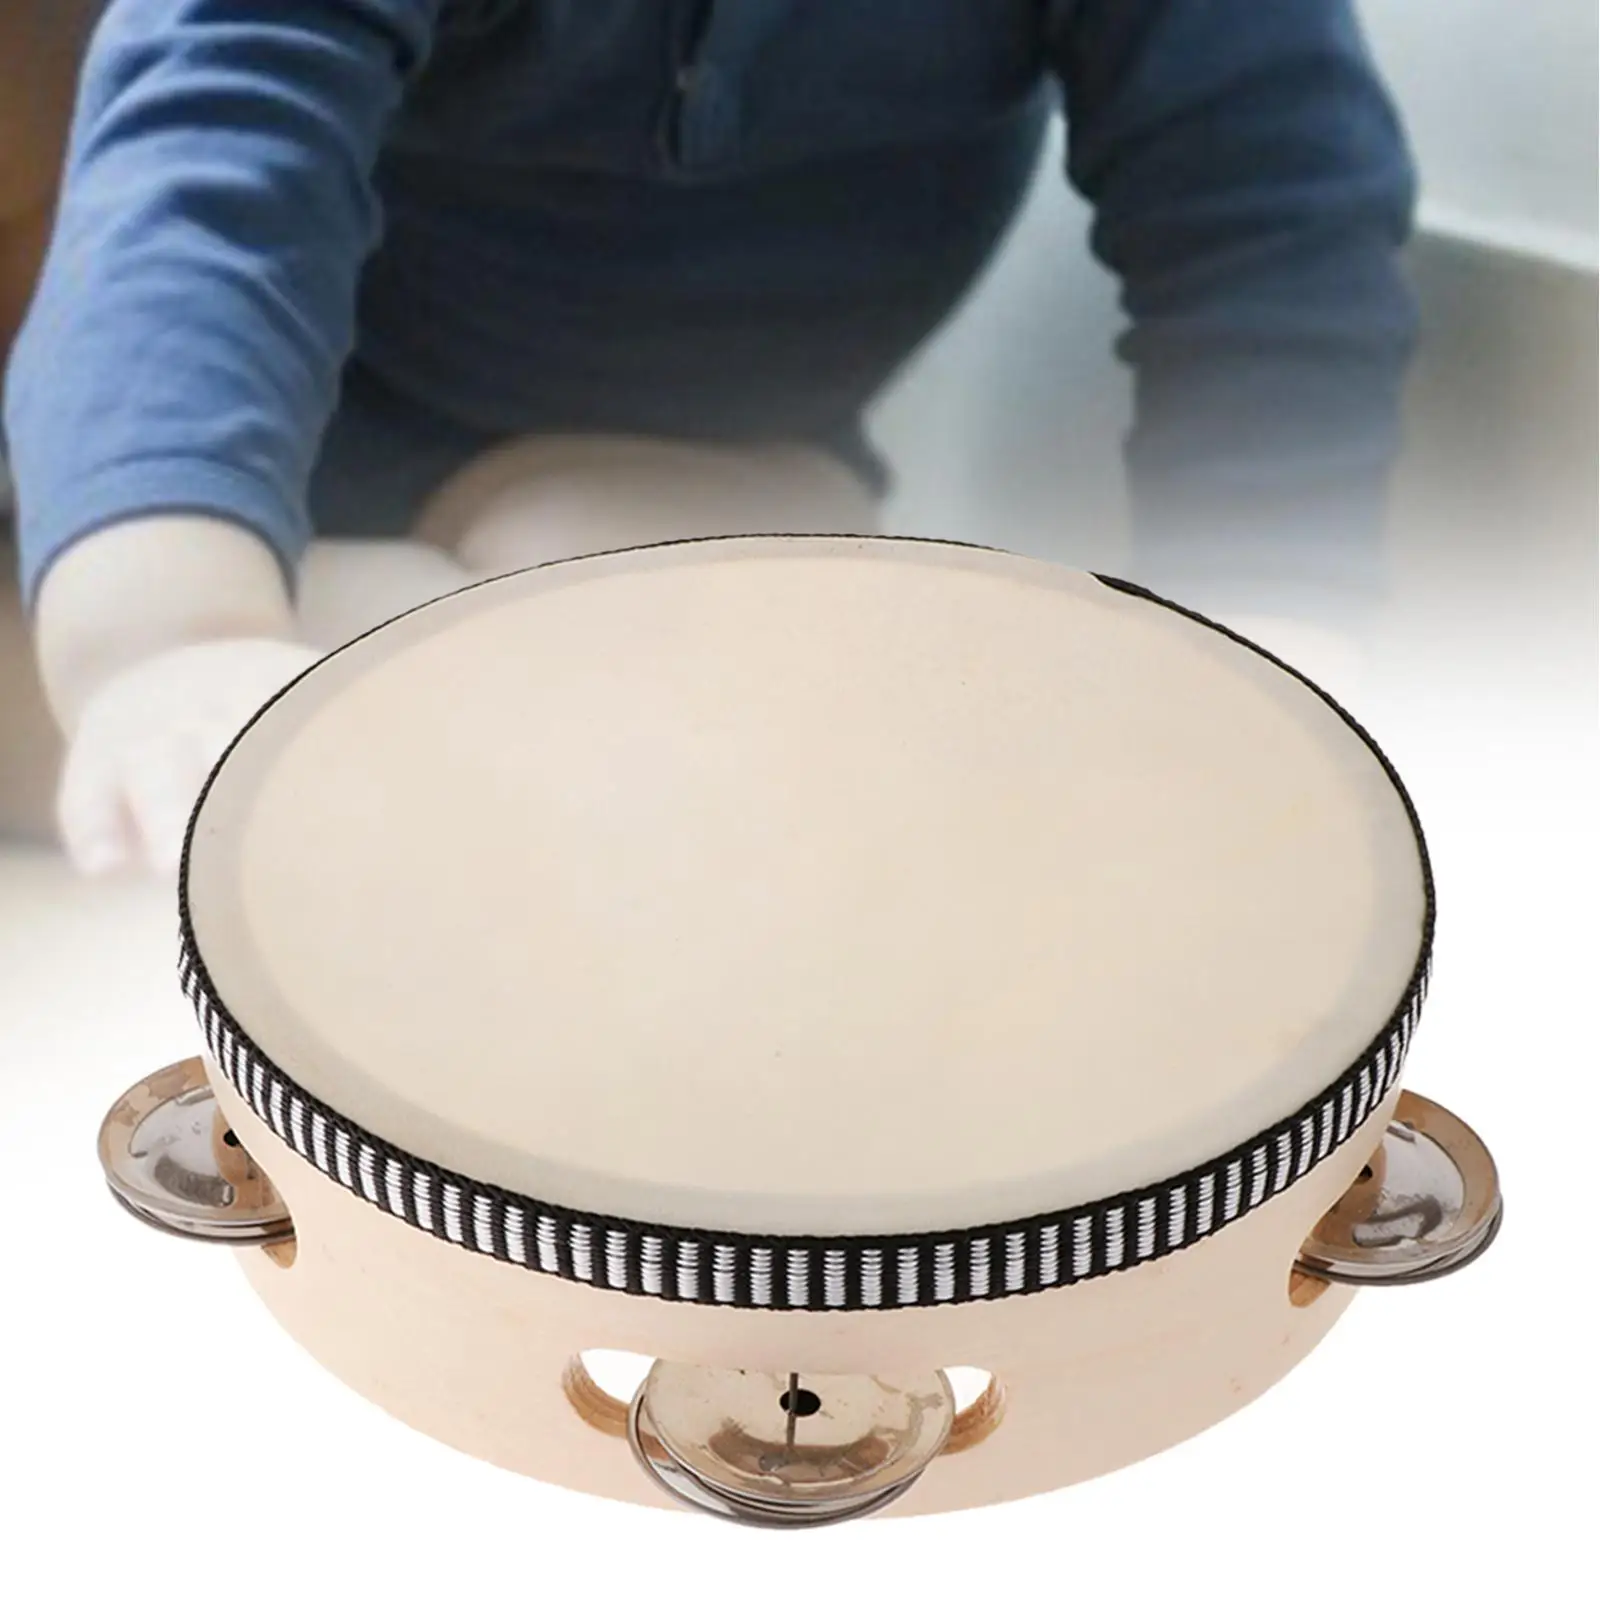 

Tambourine Metal Bell Durable Gift Musical Instrument ,Handheld Drum Percussion for KTV Party Adults Kids